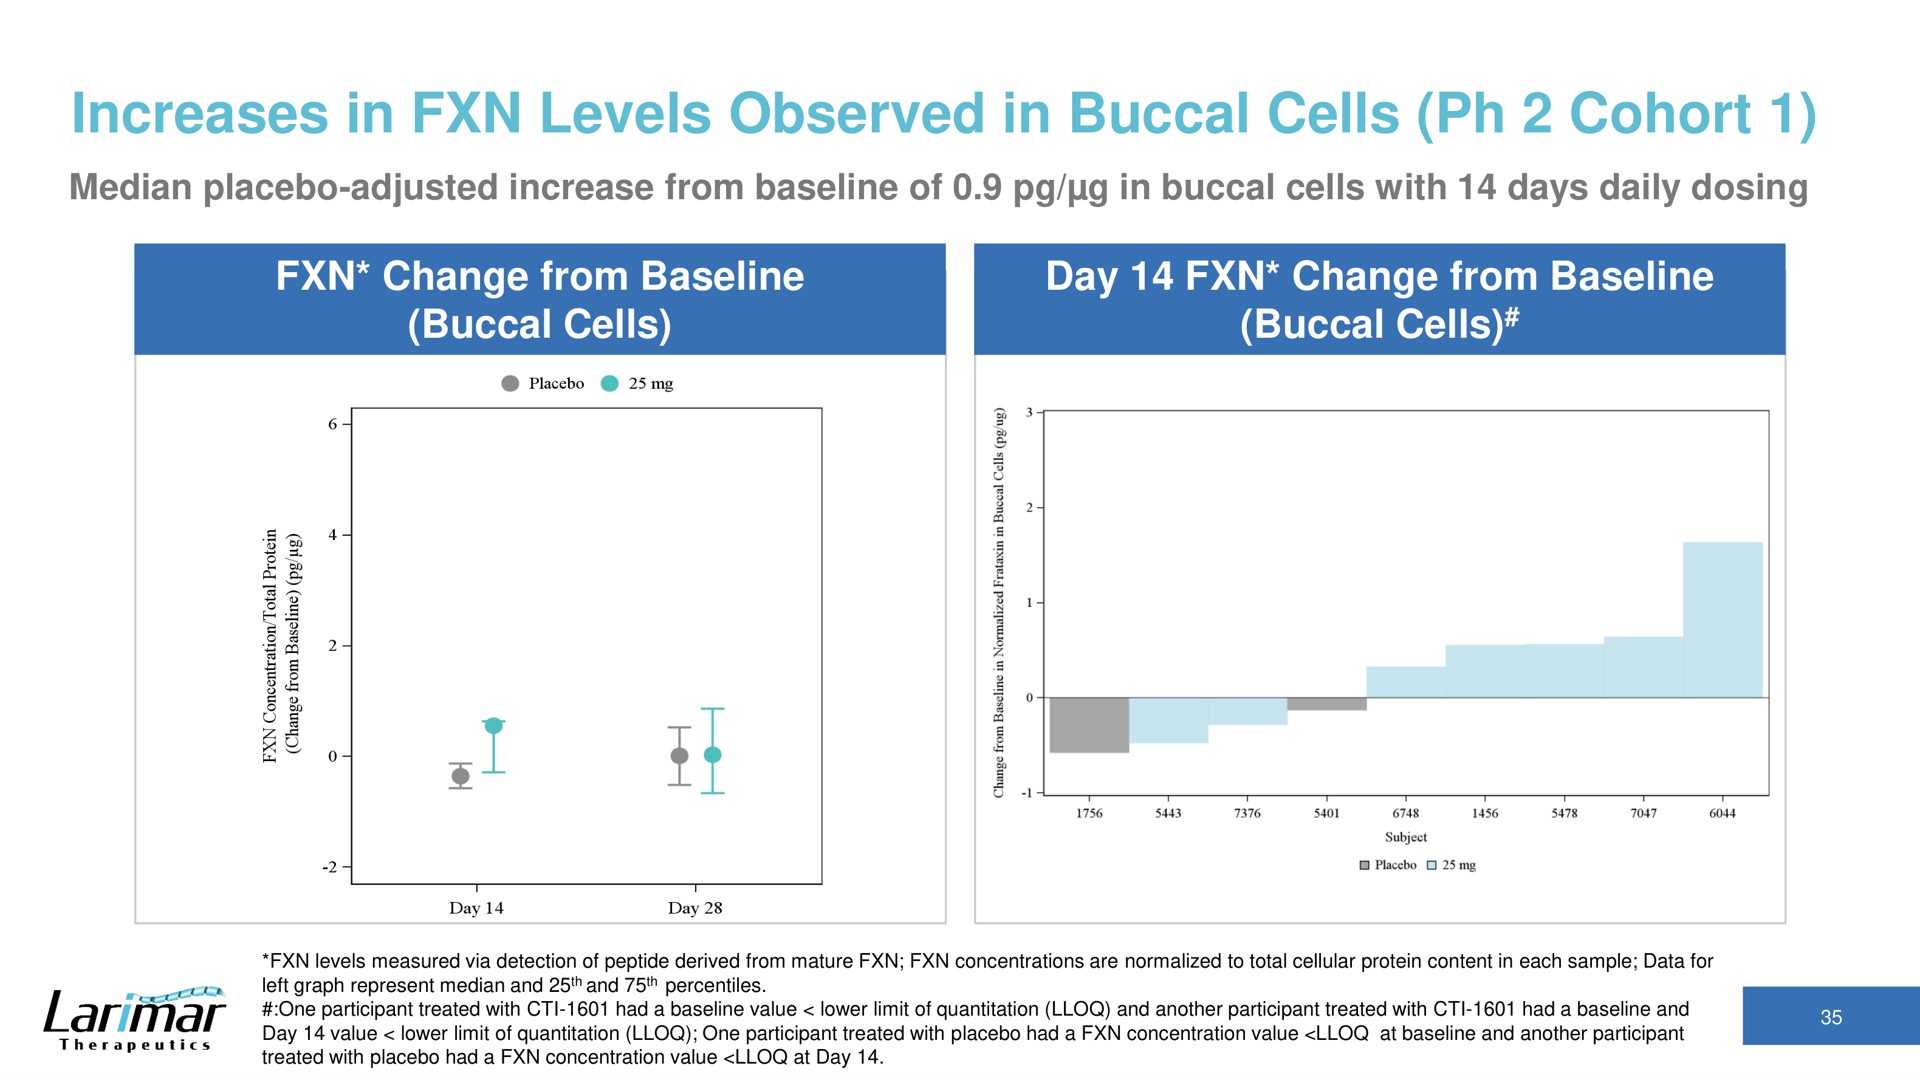 increases in levels observed in buccal cells cohort | Larimar Therapeutics